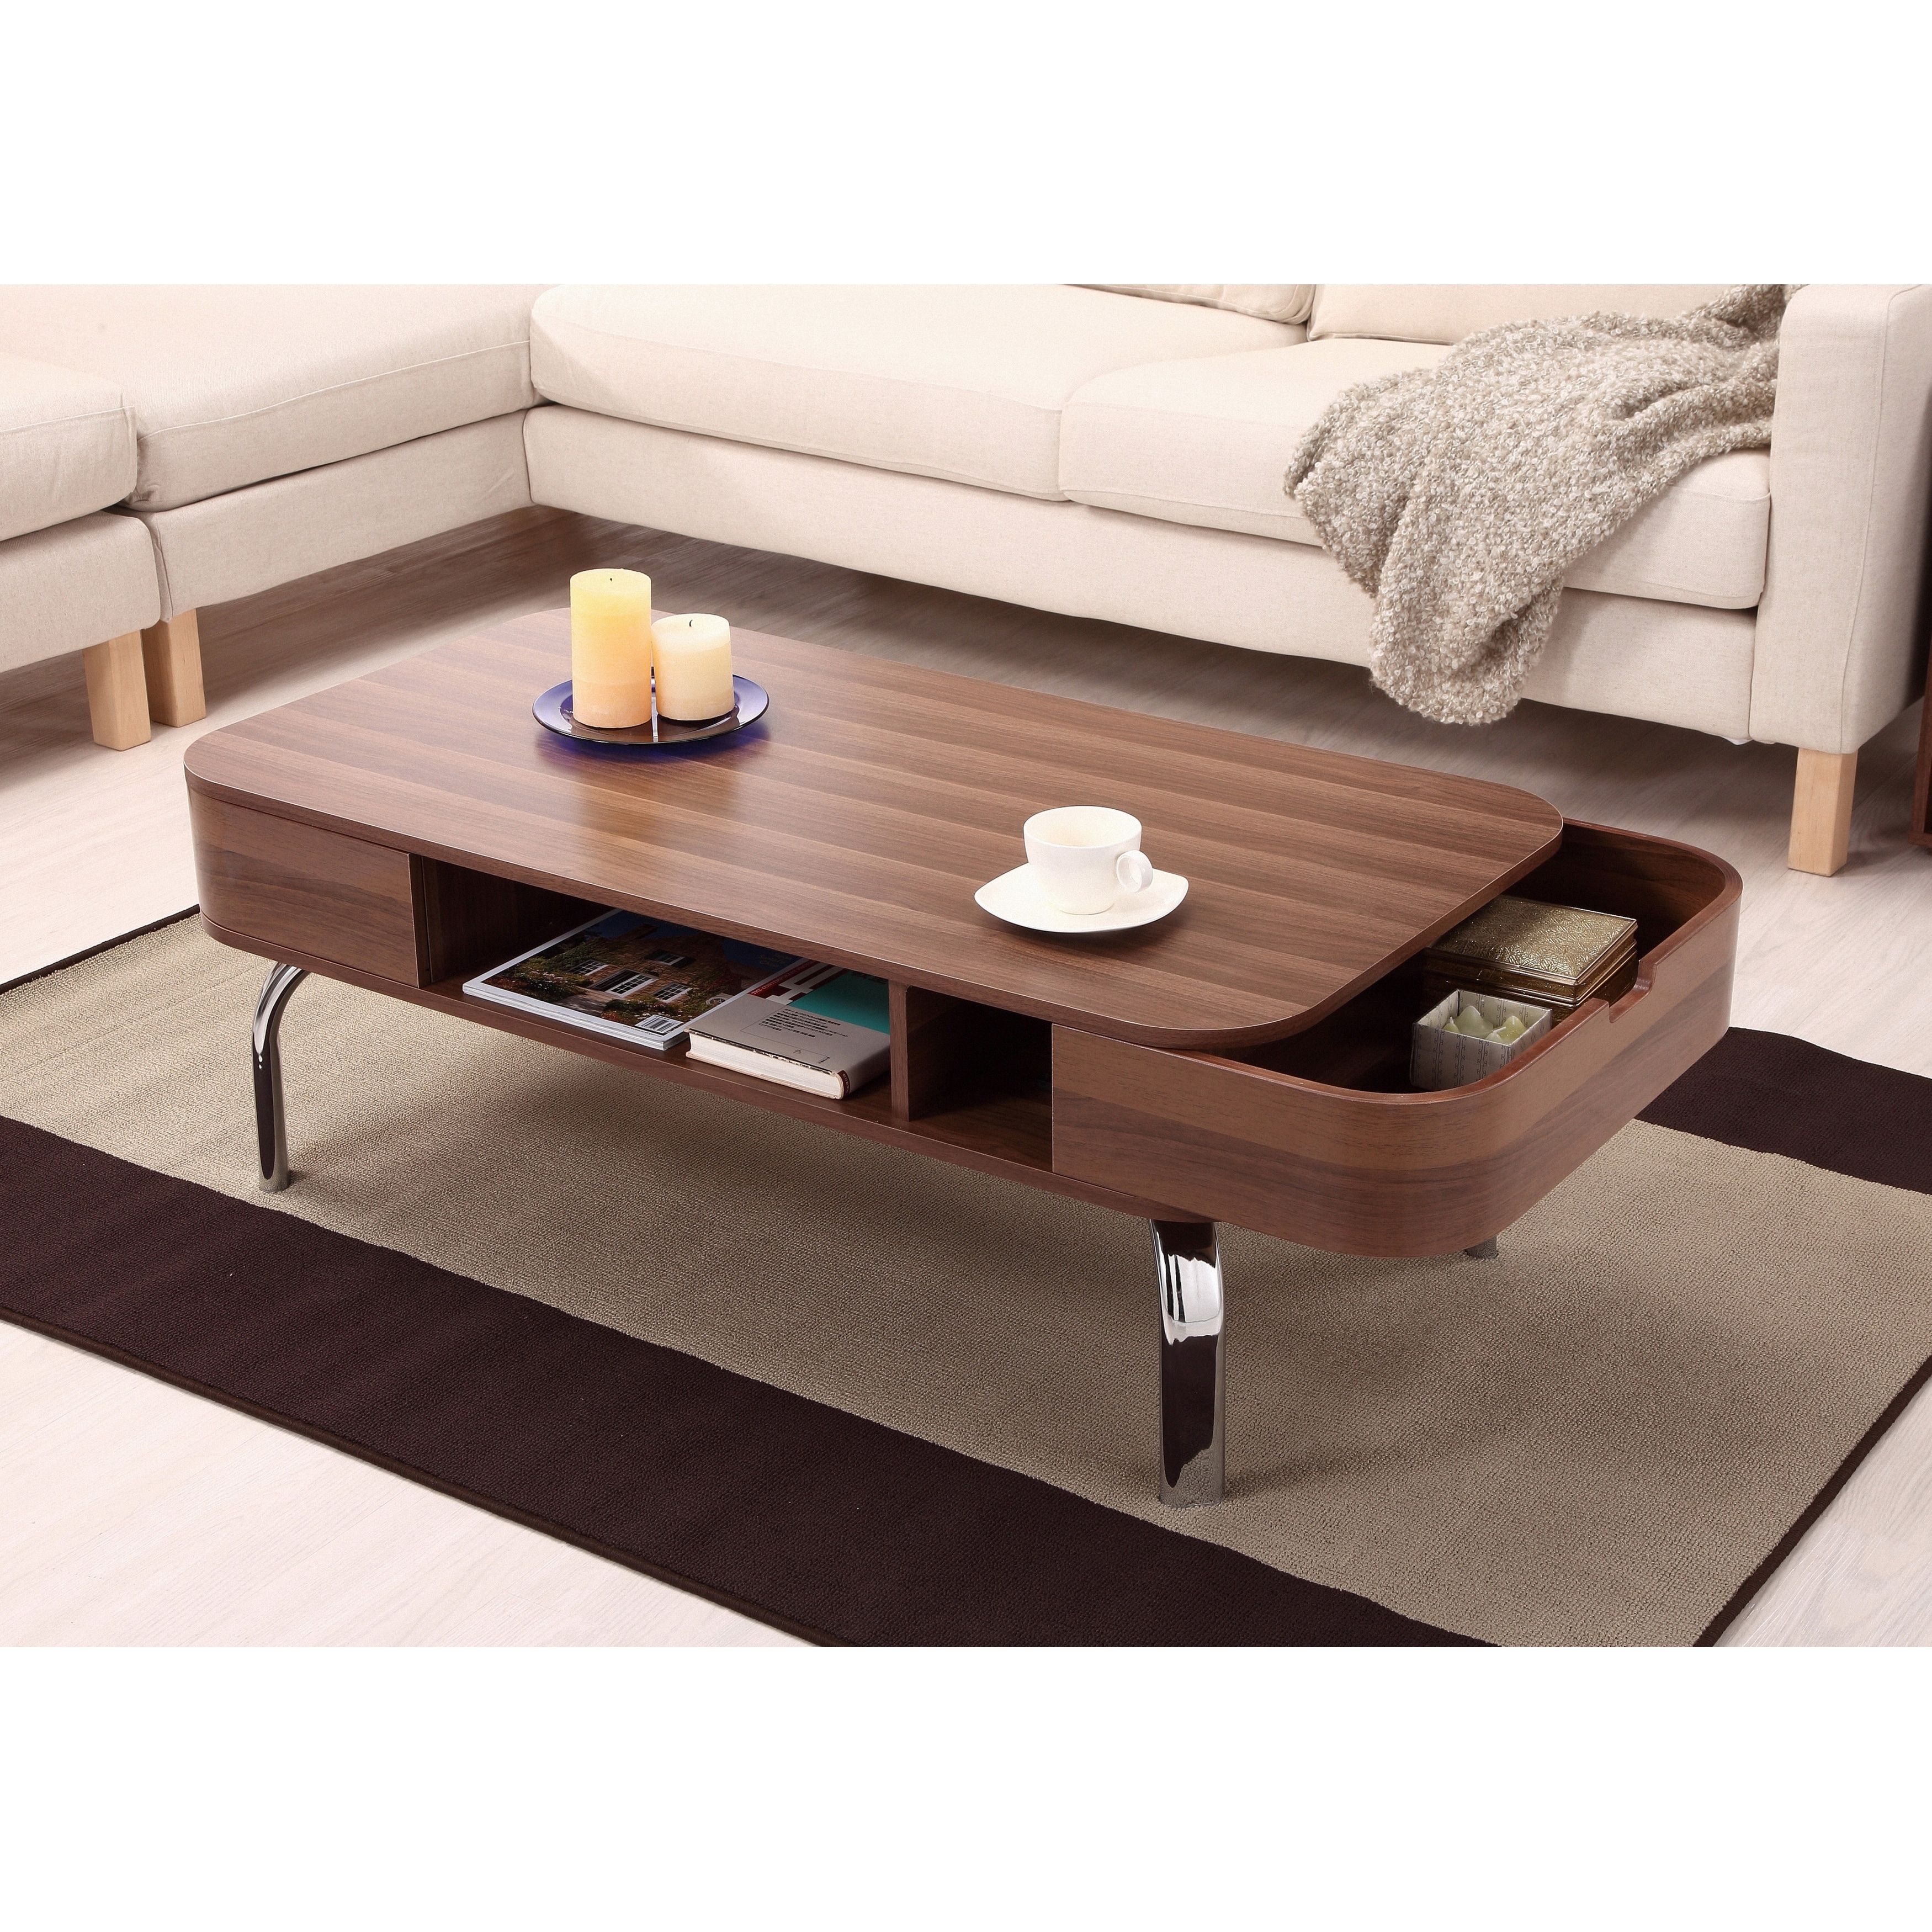 Shop Furniture Of America Berkley Mid Century Modern Walnut Coffee With Contemporary Curves Coffee Tables (View 28 of 30)